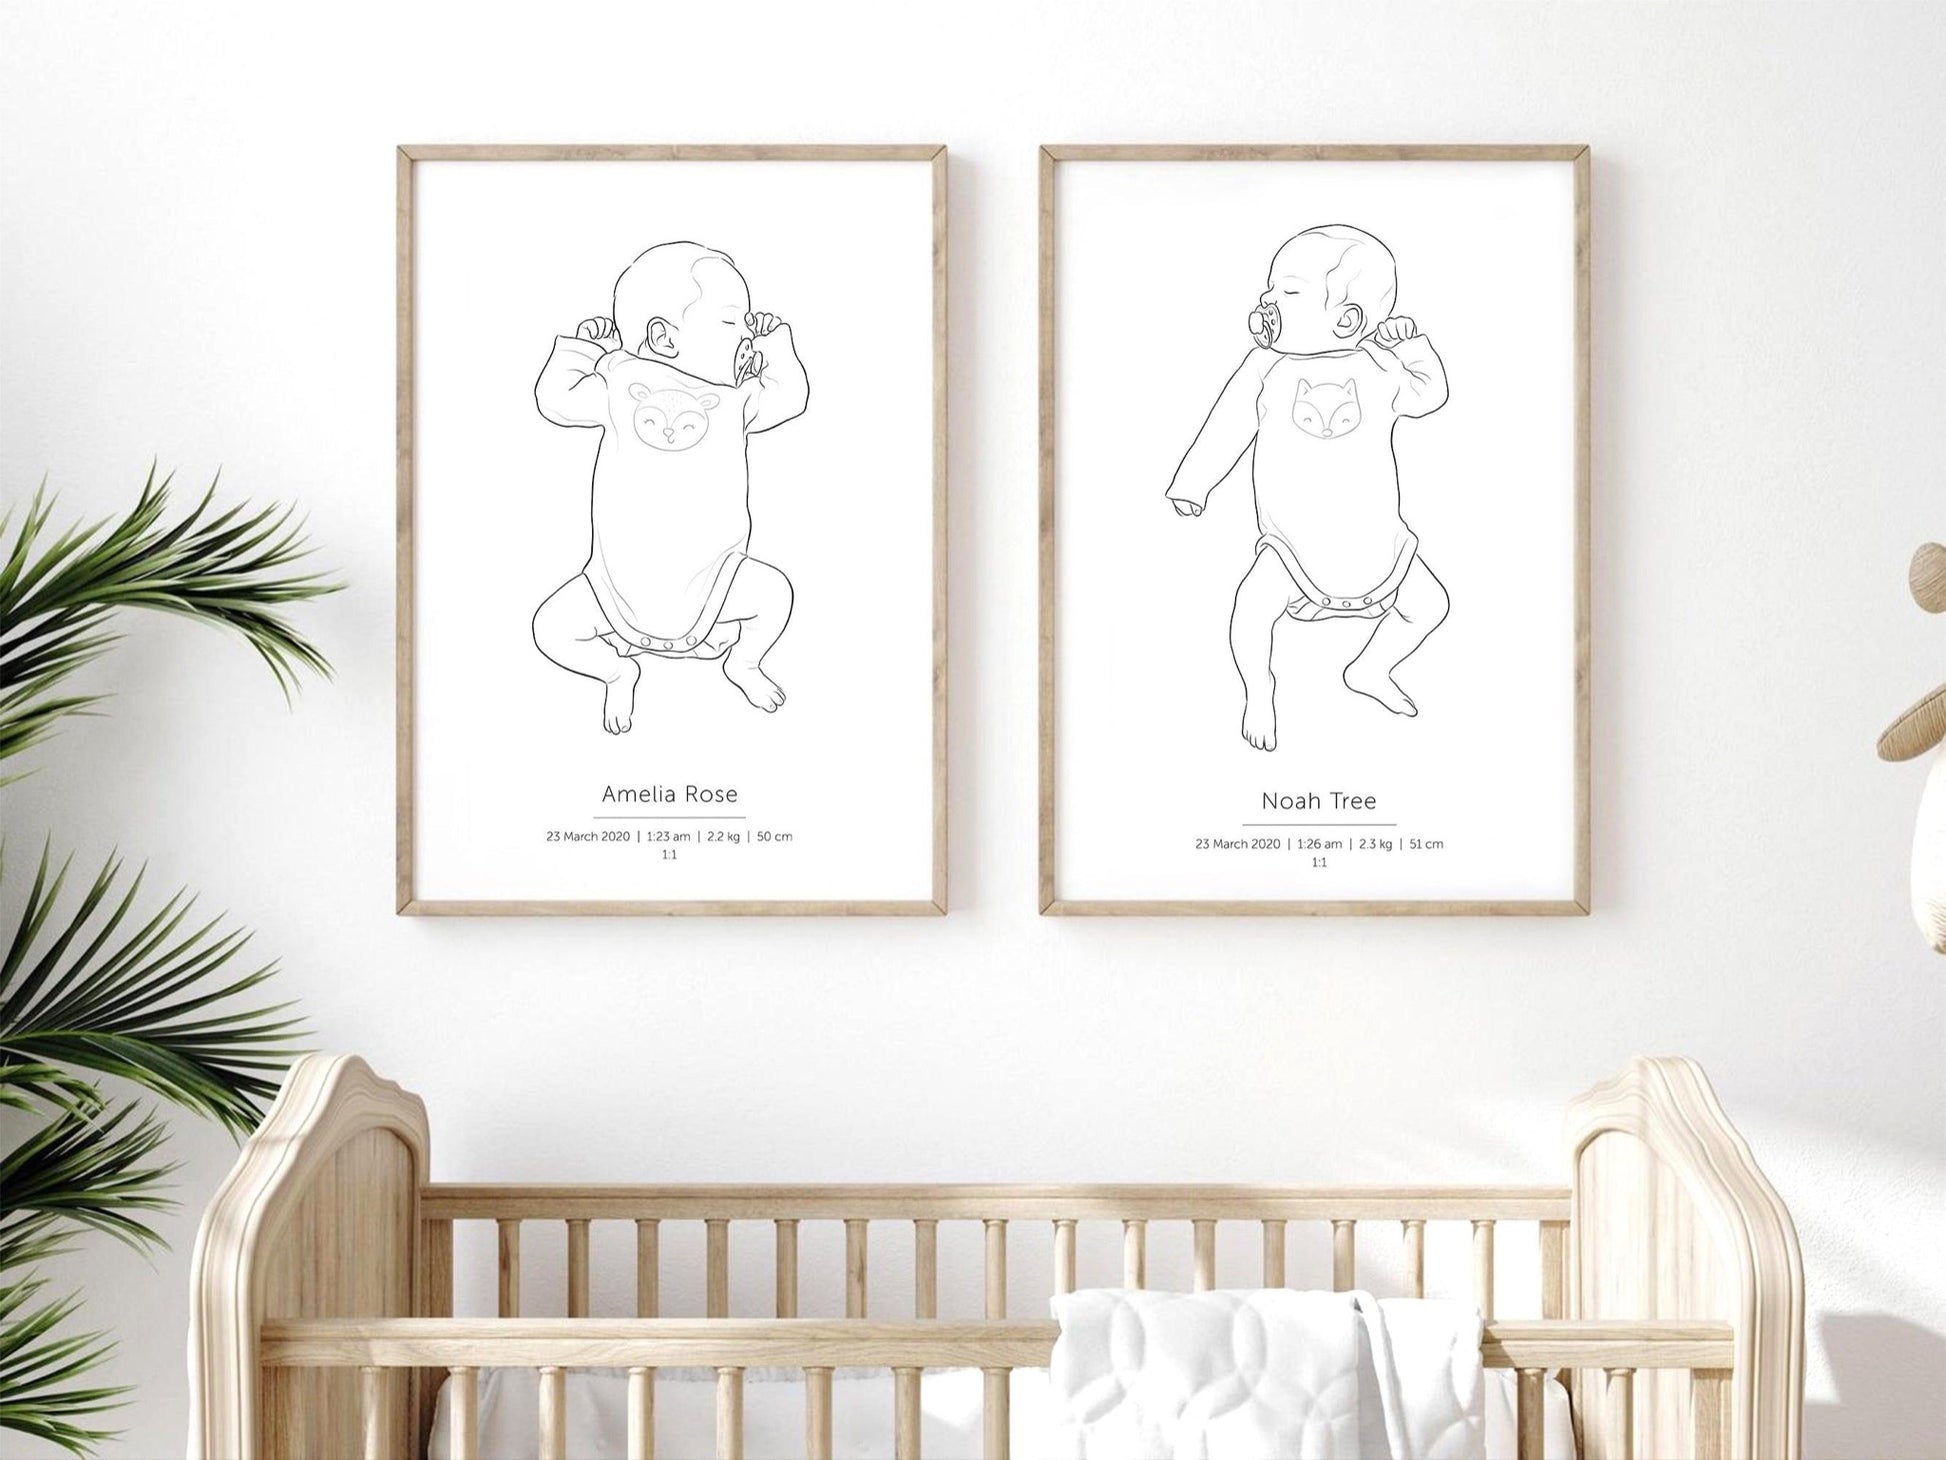 Custom made birth posters of twins in 1:1 scale with a detailed hand drawn portrait of the twins